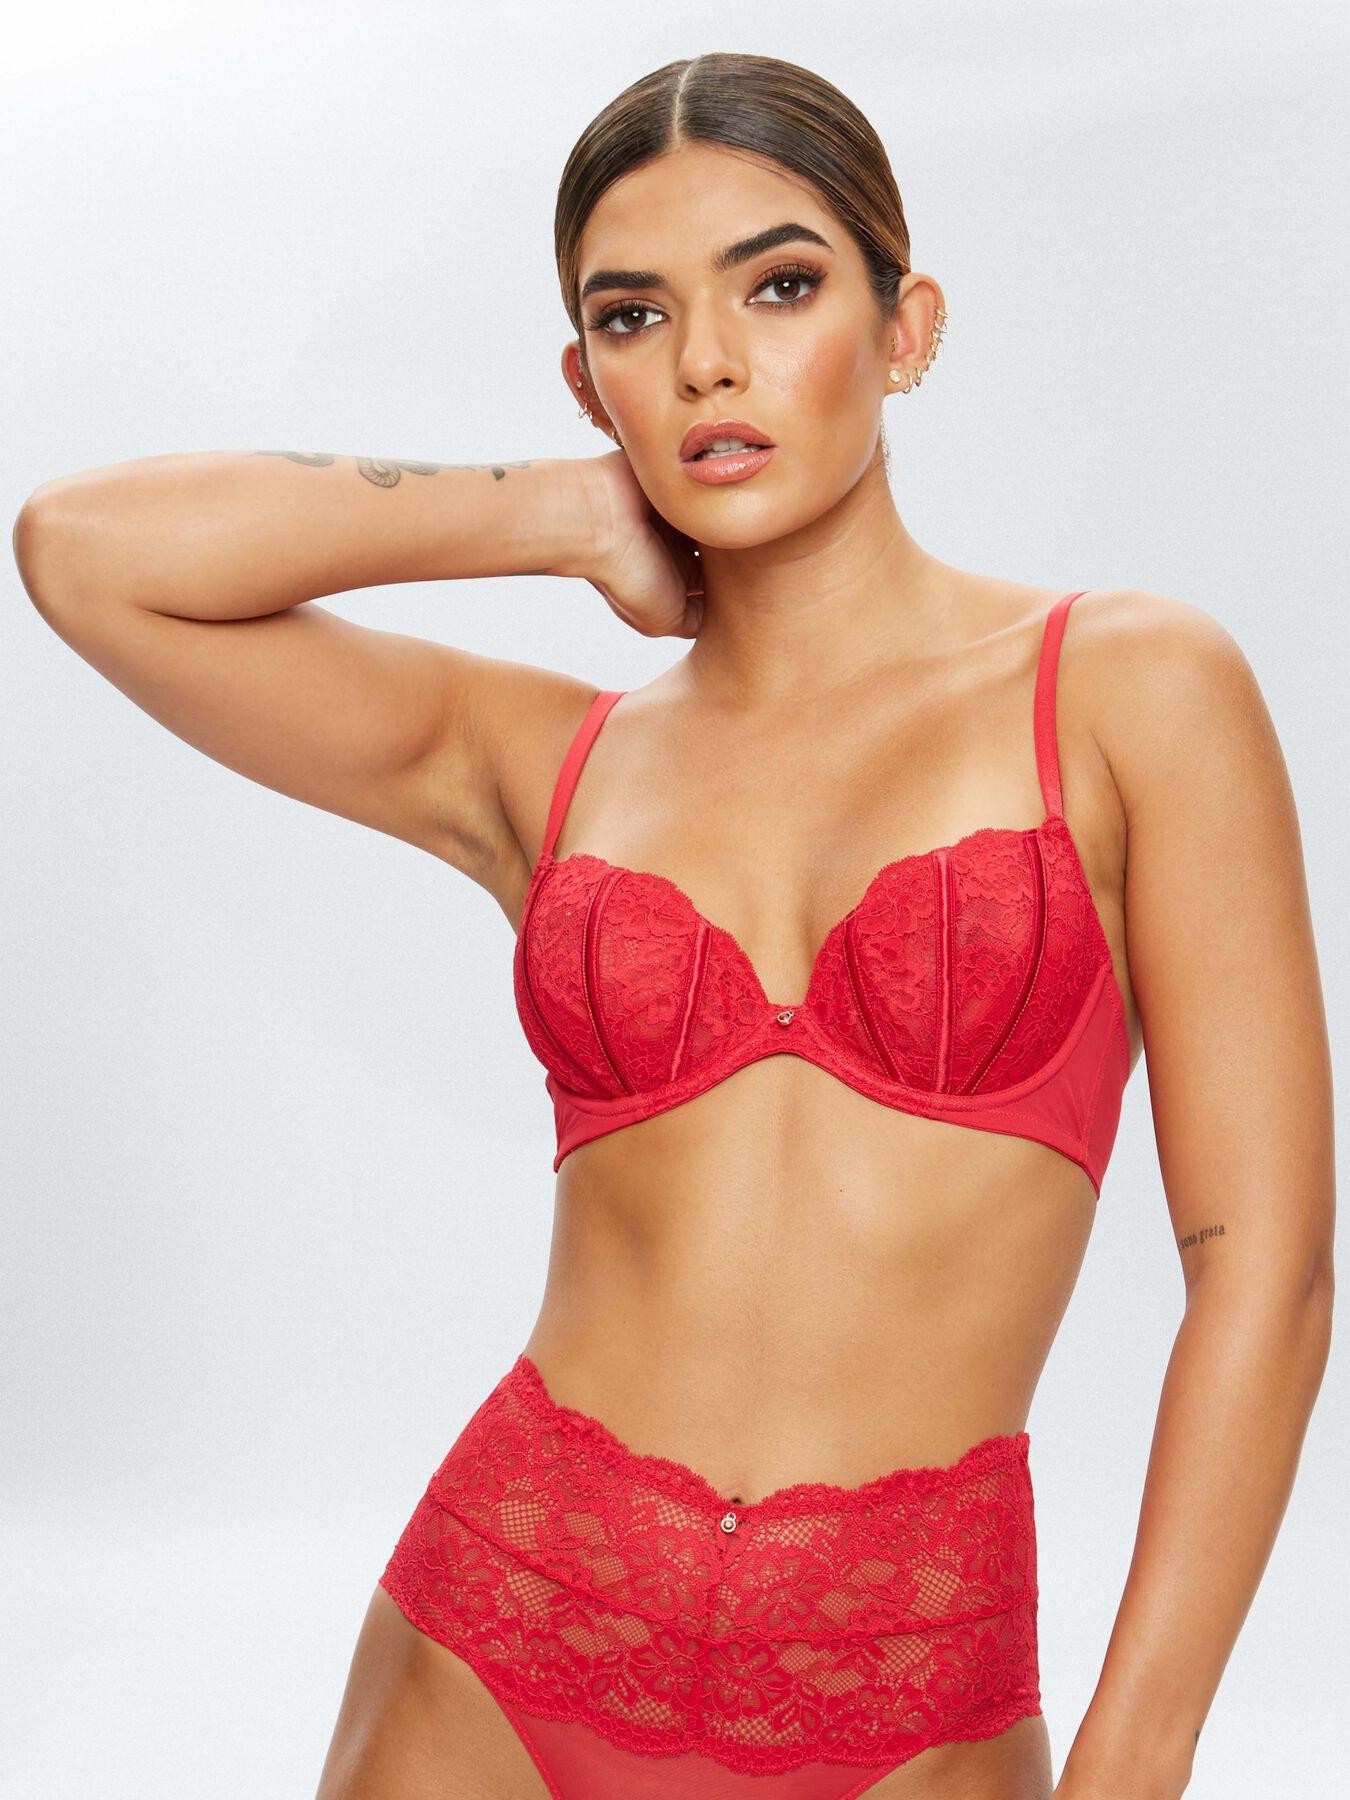 Ann Summers - - Ann Summers RED Lace Trim Satin Bra & Crotchless